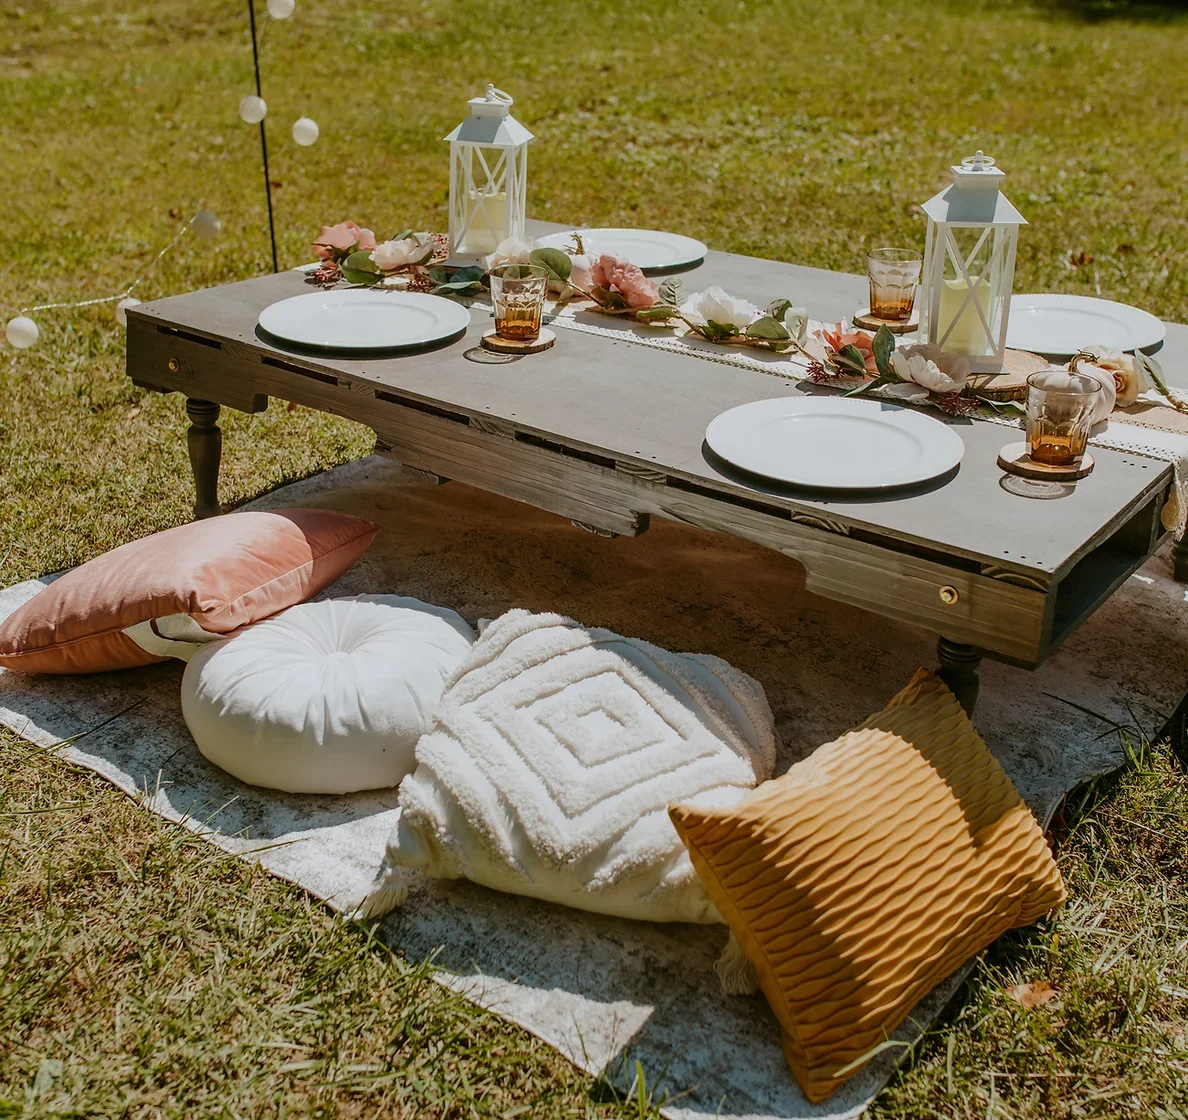 Picnic table set for lunch